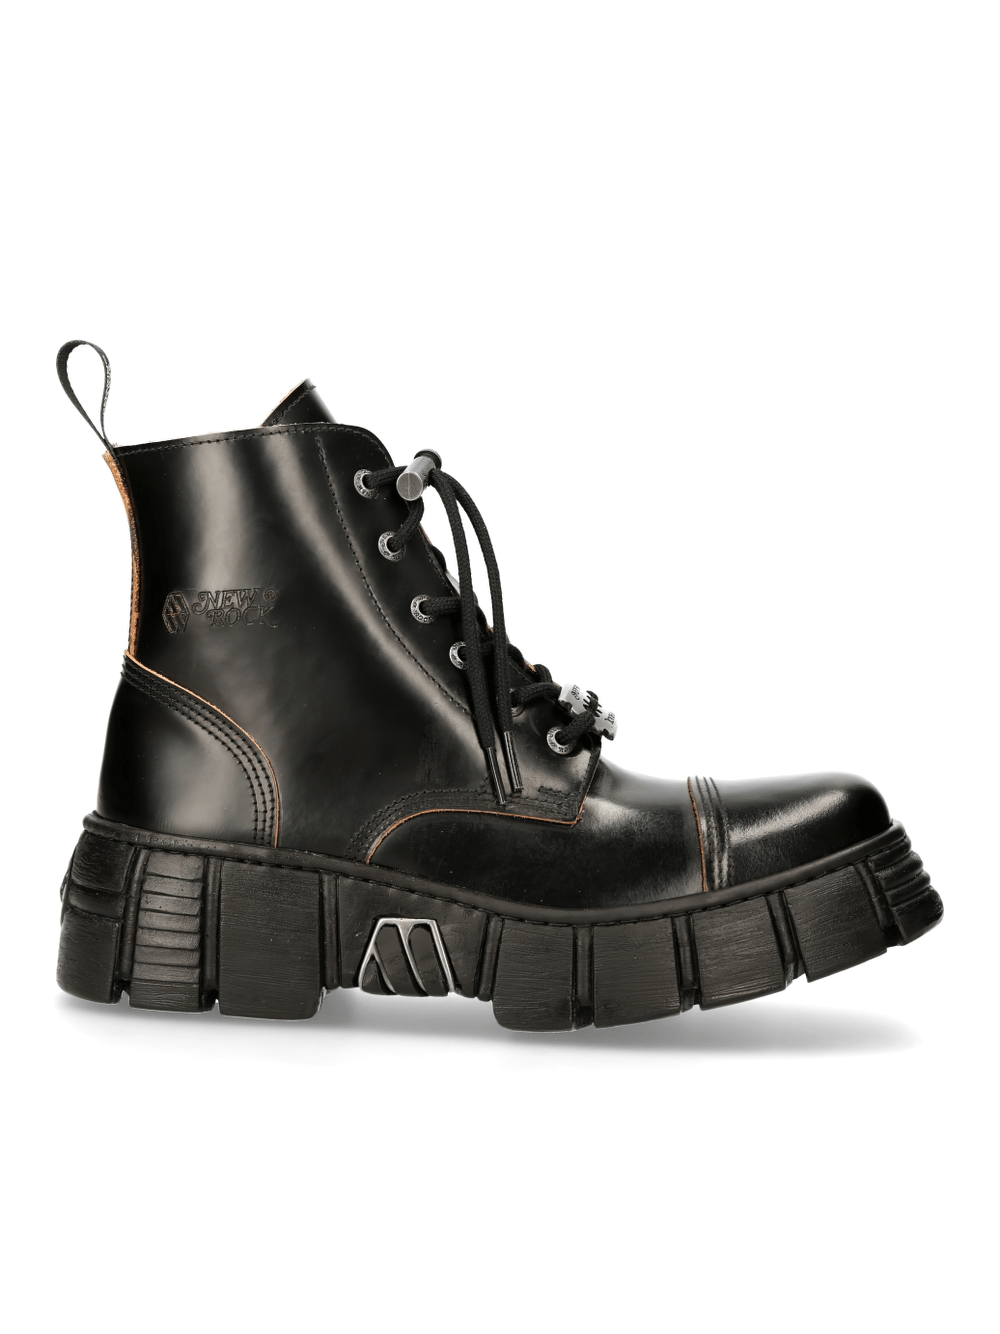 NEW ROCK Rugged Black Leather Lace-Up Ankle Boots